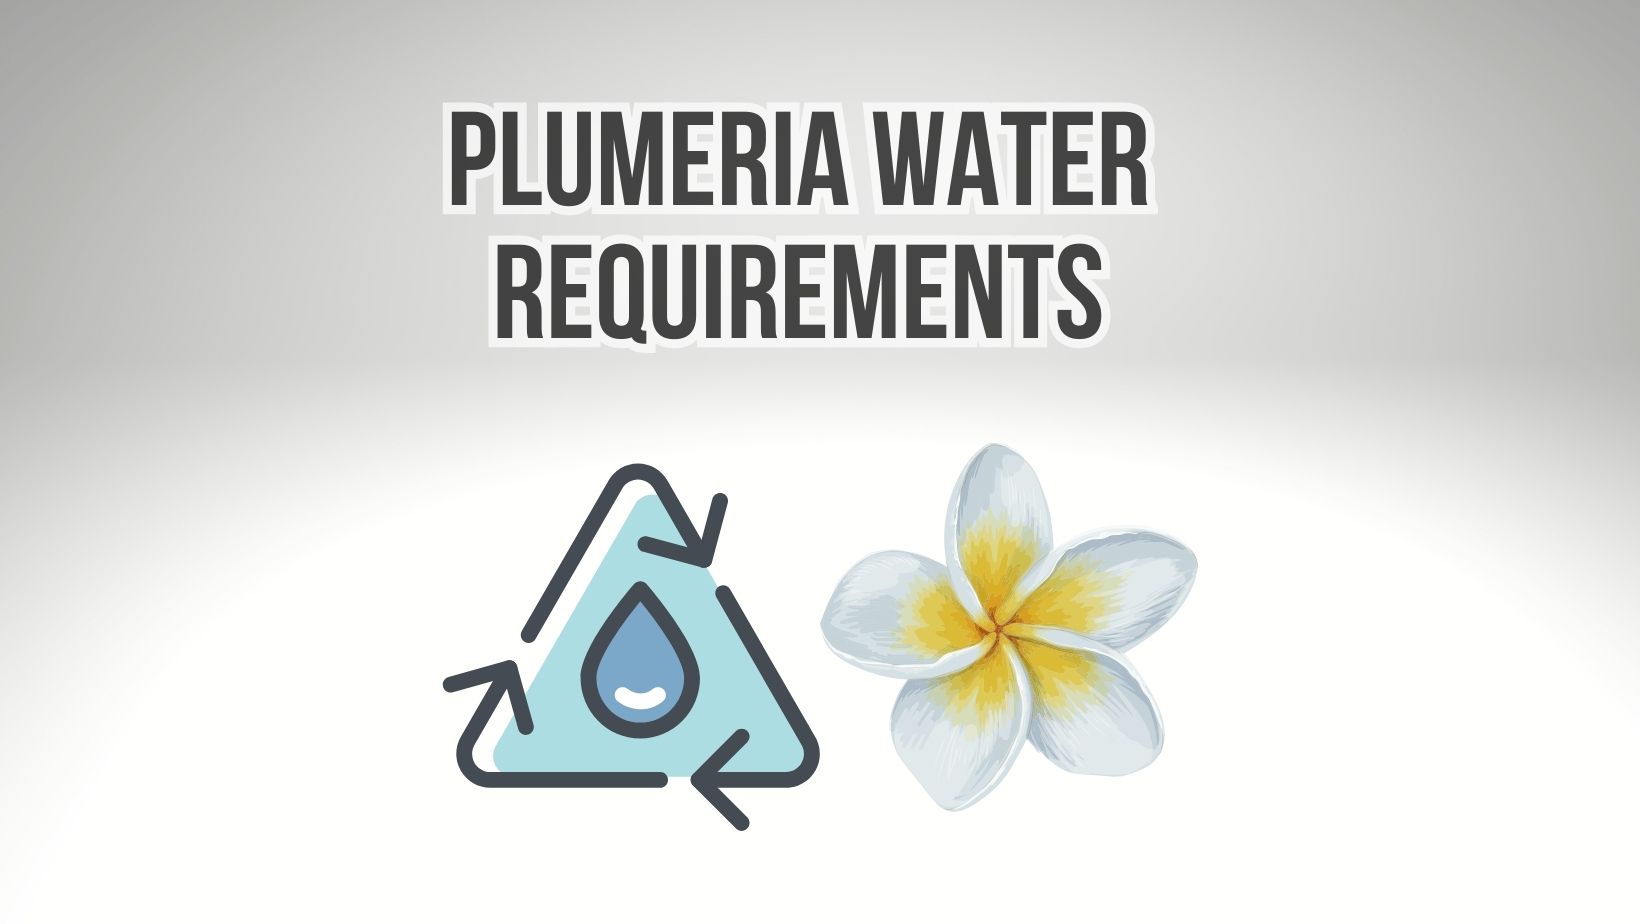 Plumeria Water Requirements Tips to Avoid Overwatering